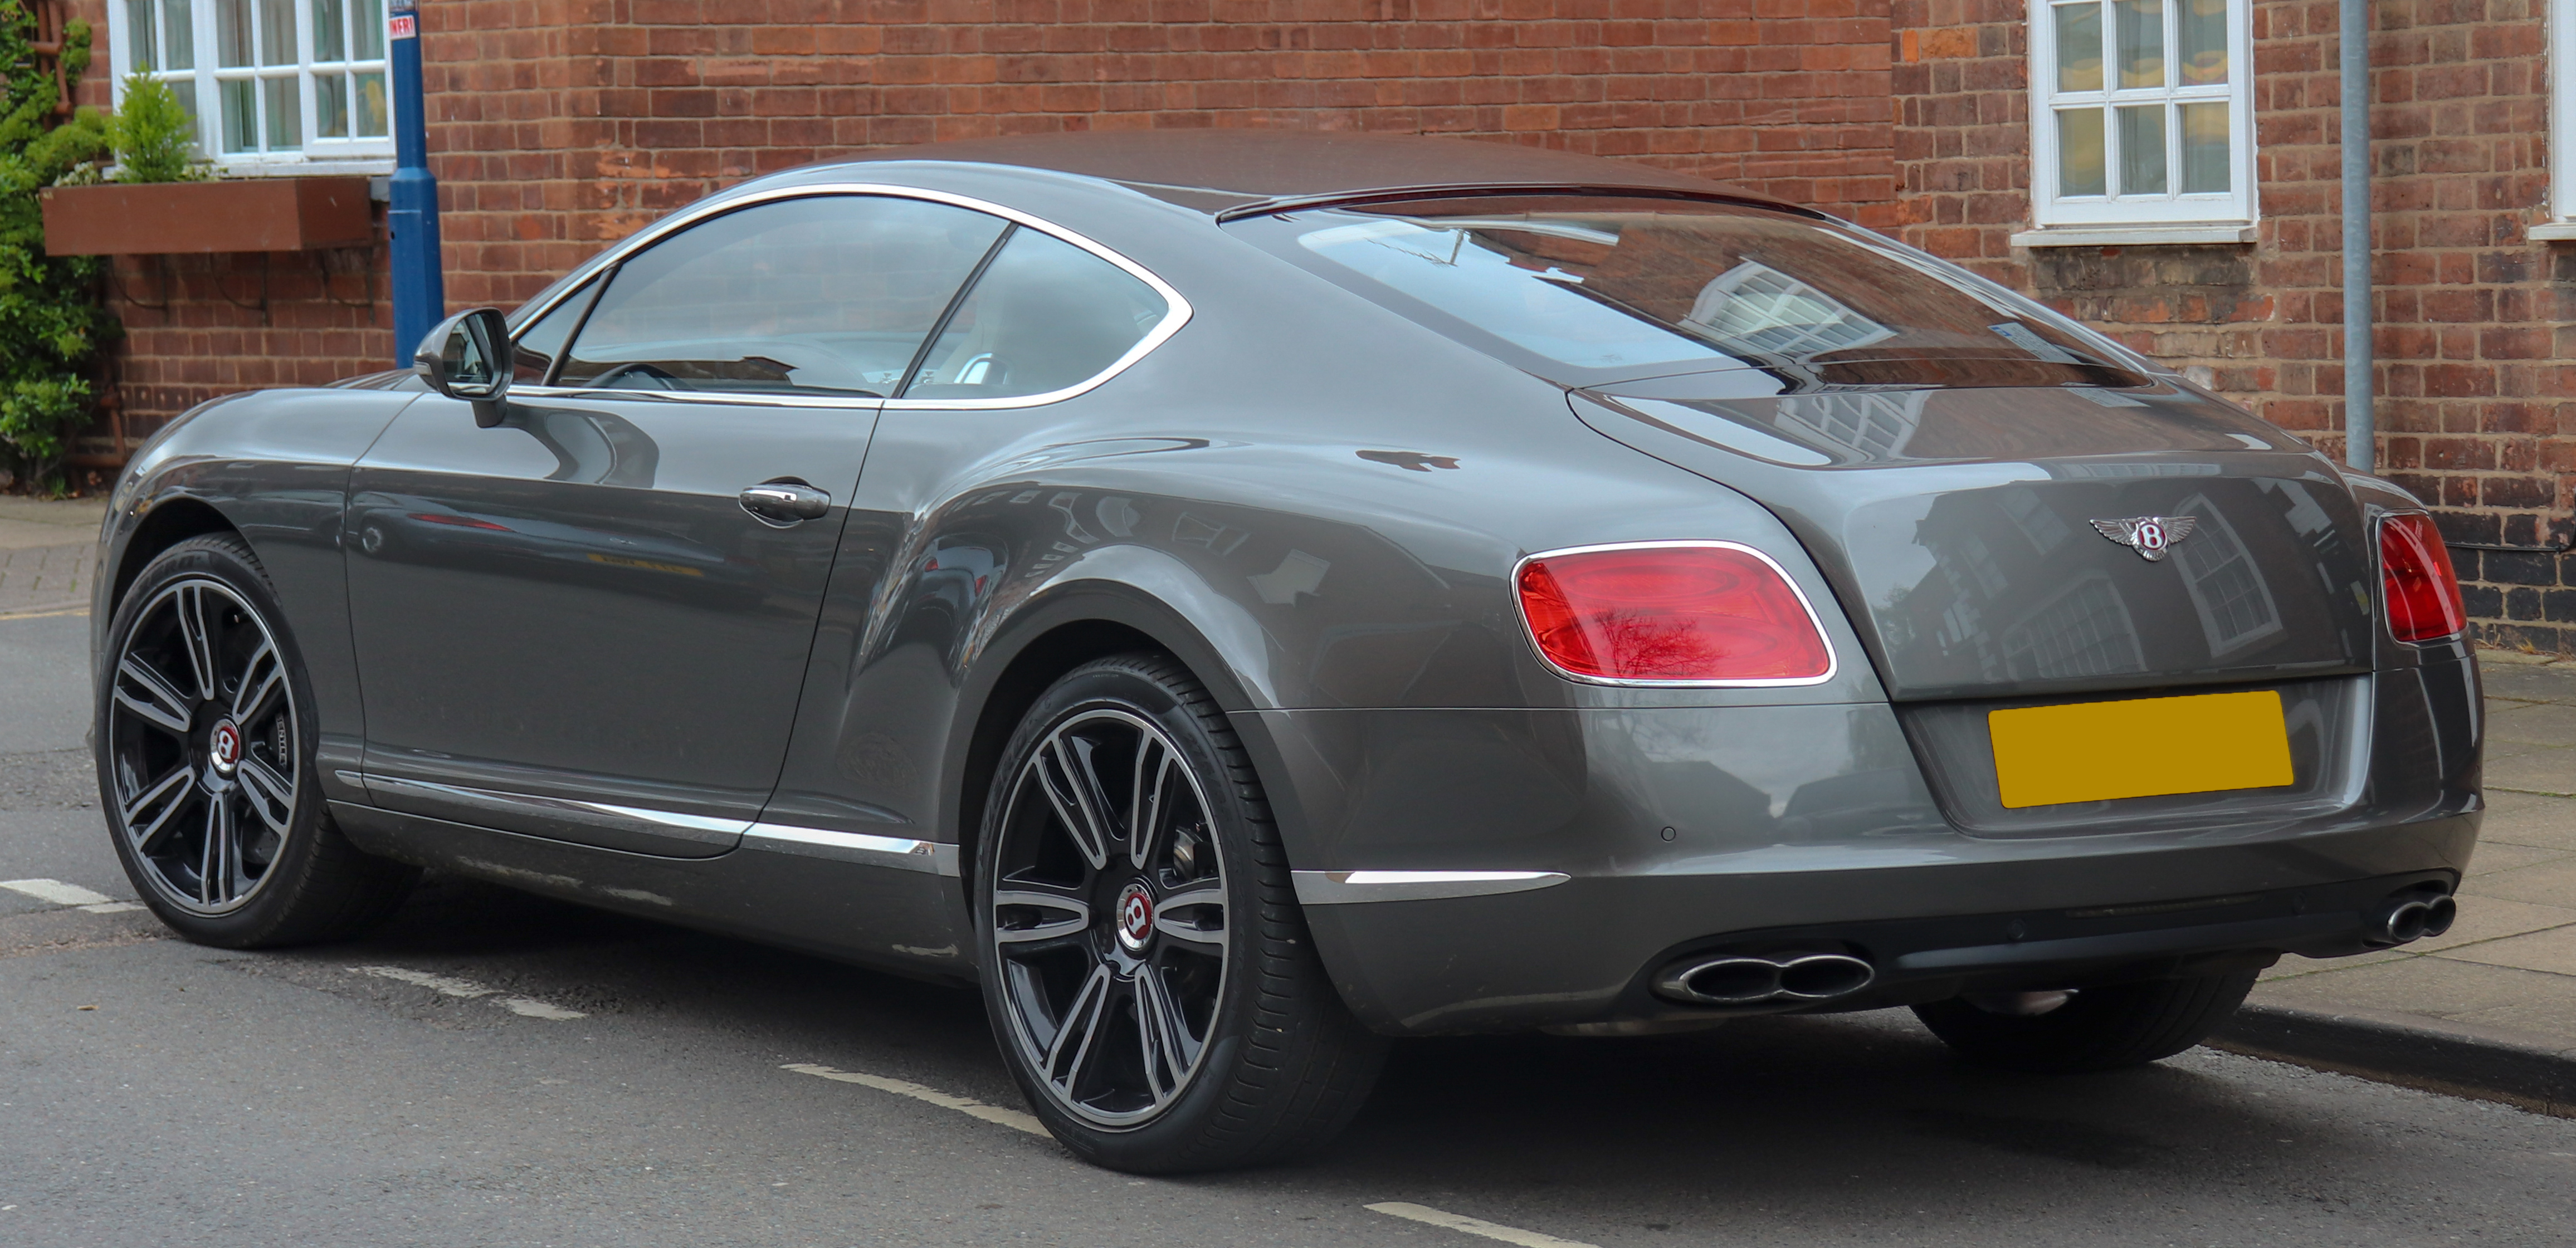 File:2015 Bentley Continental GT V8 Automatic 4.0 Rear.jpg - Wikimedia  Commons